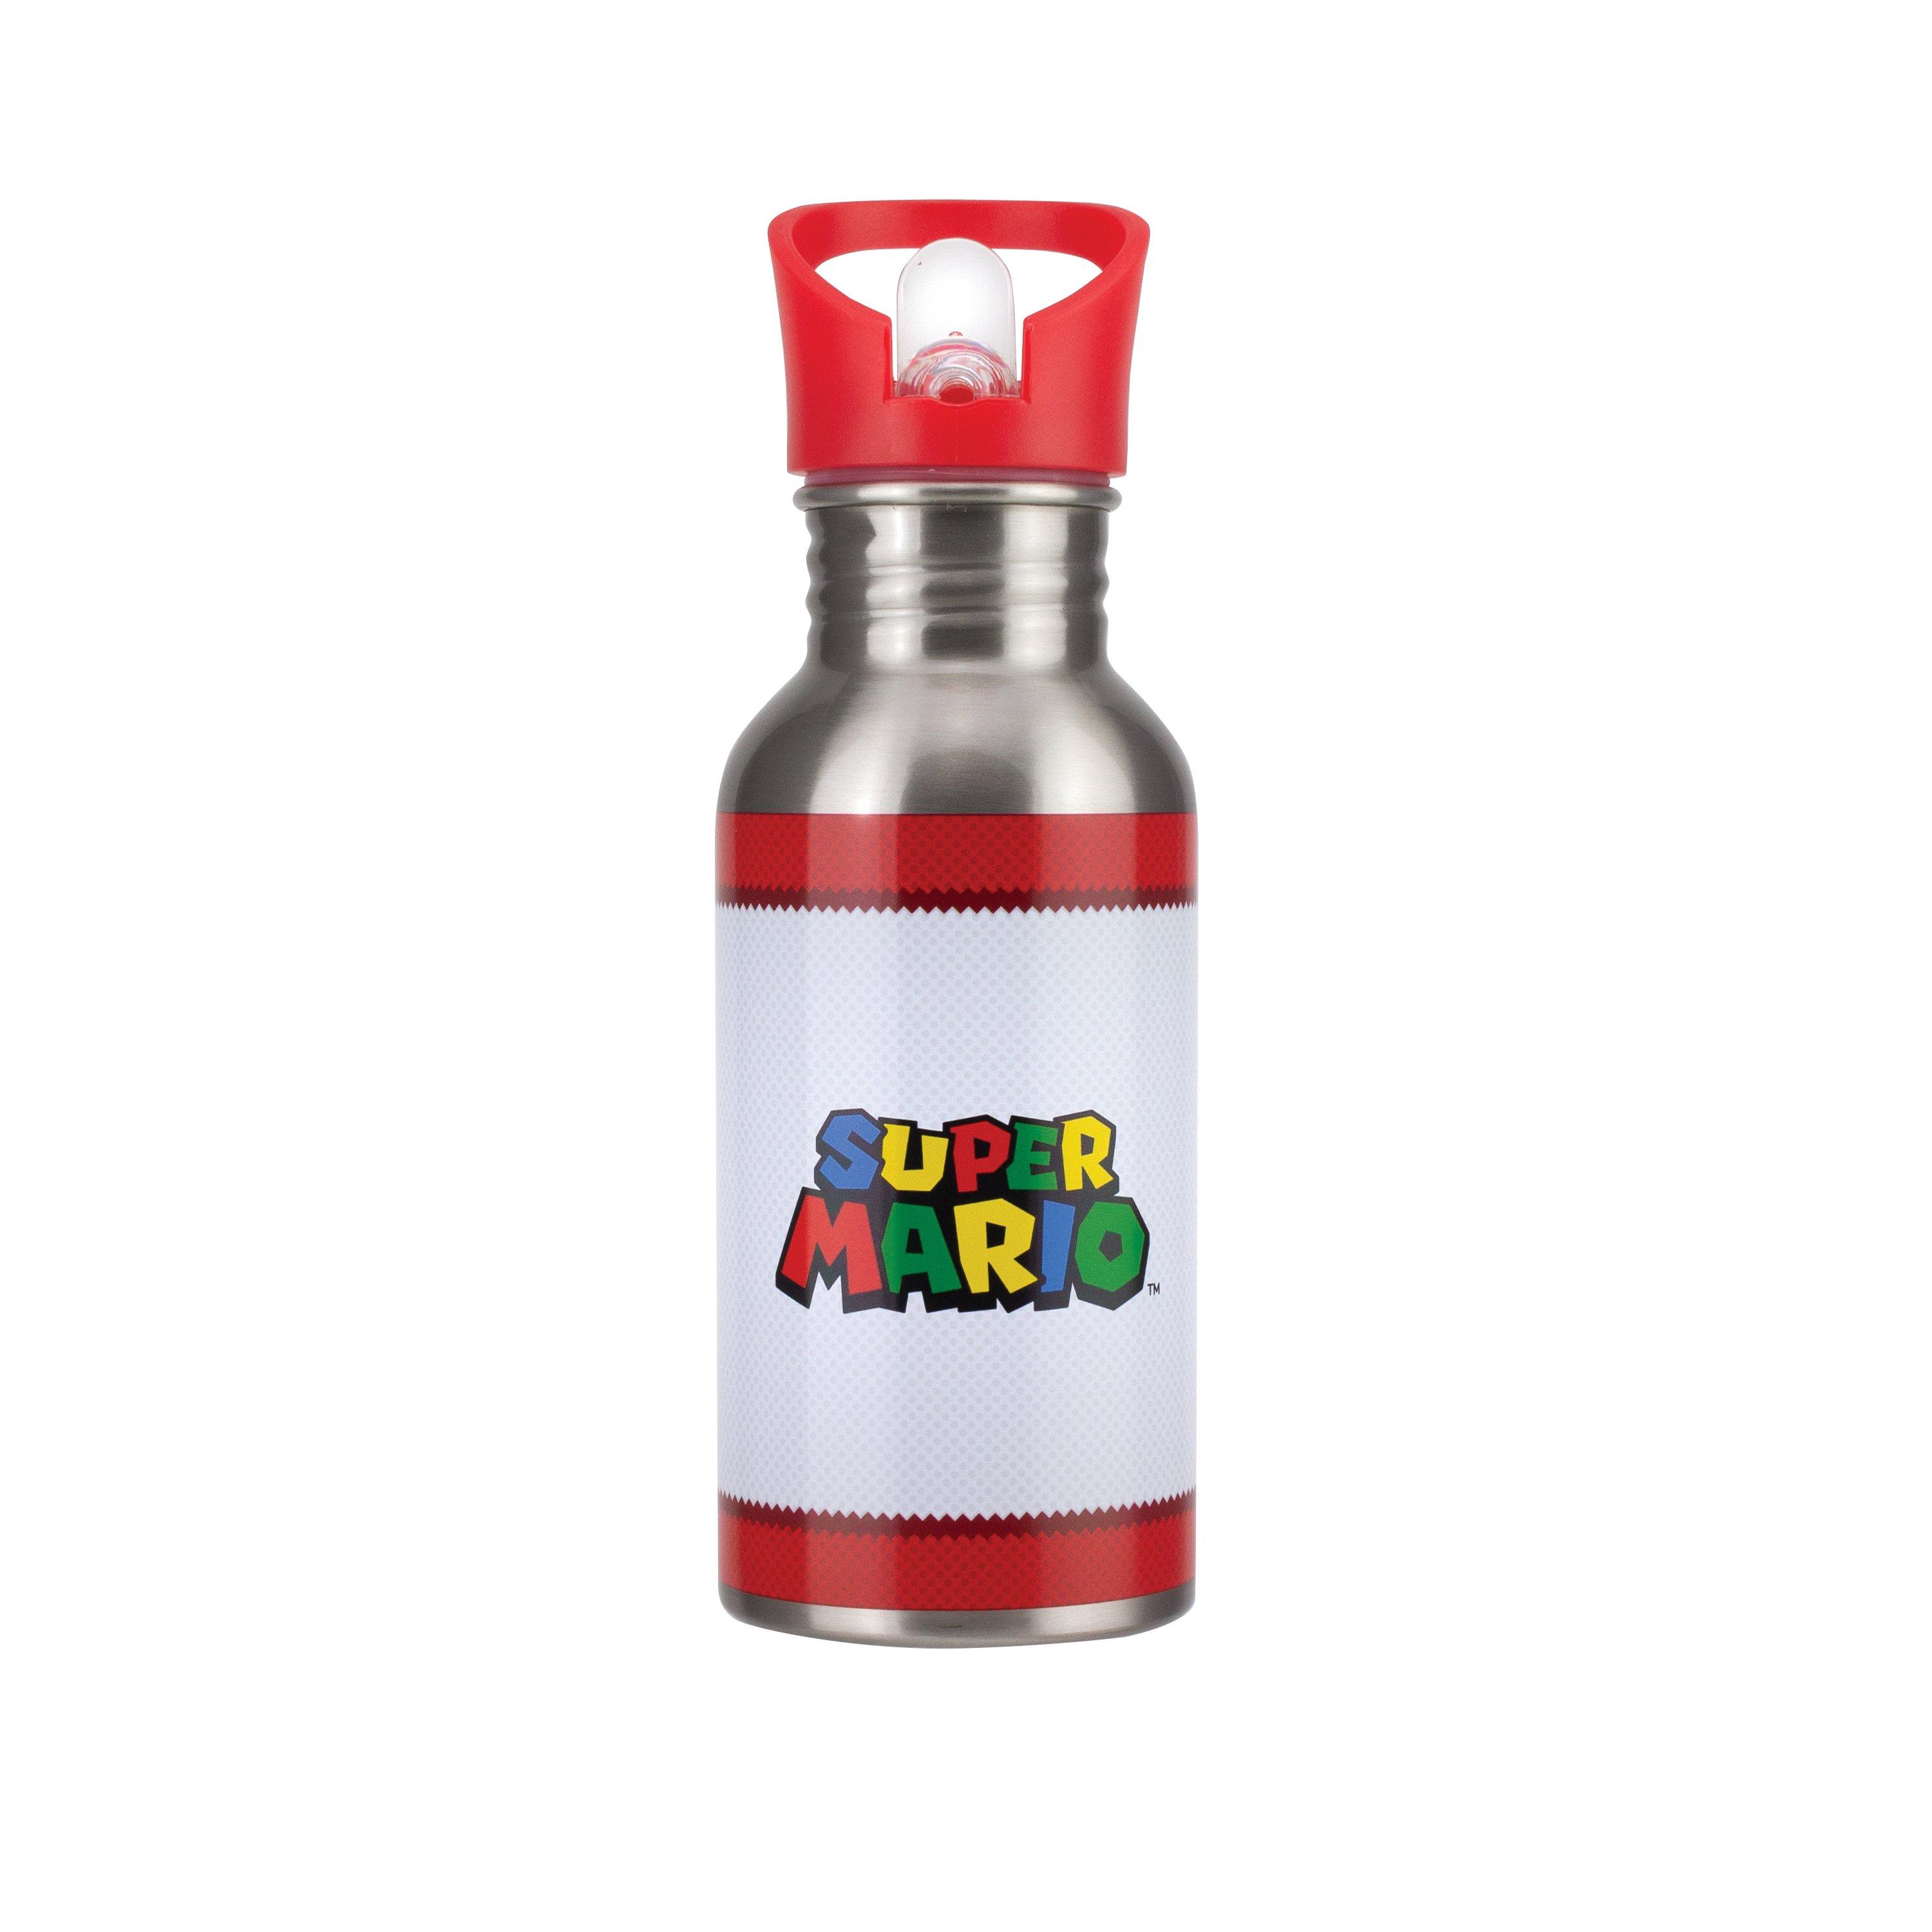 New Super Mario Stainless Steel 304 Thermos Mug 420ml Water Bottle